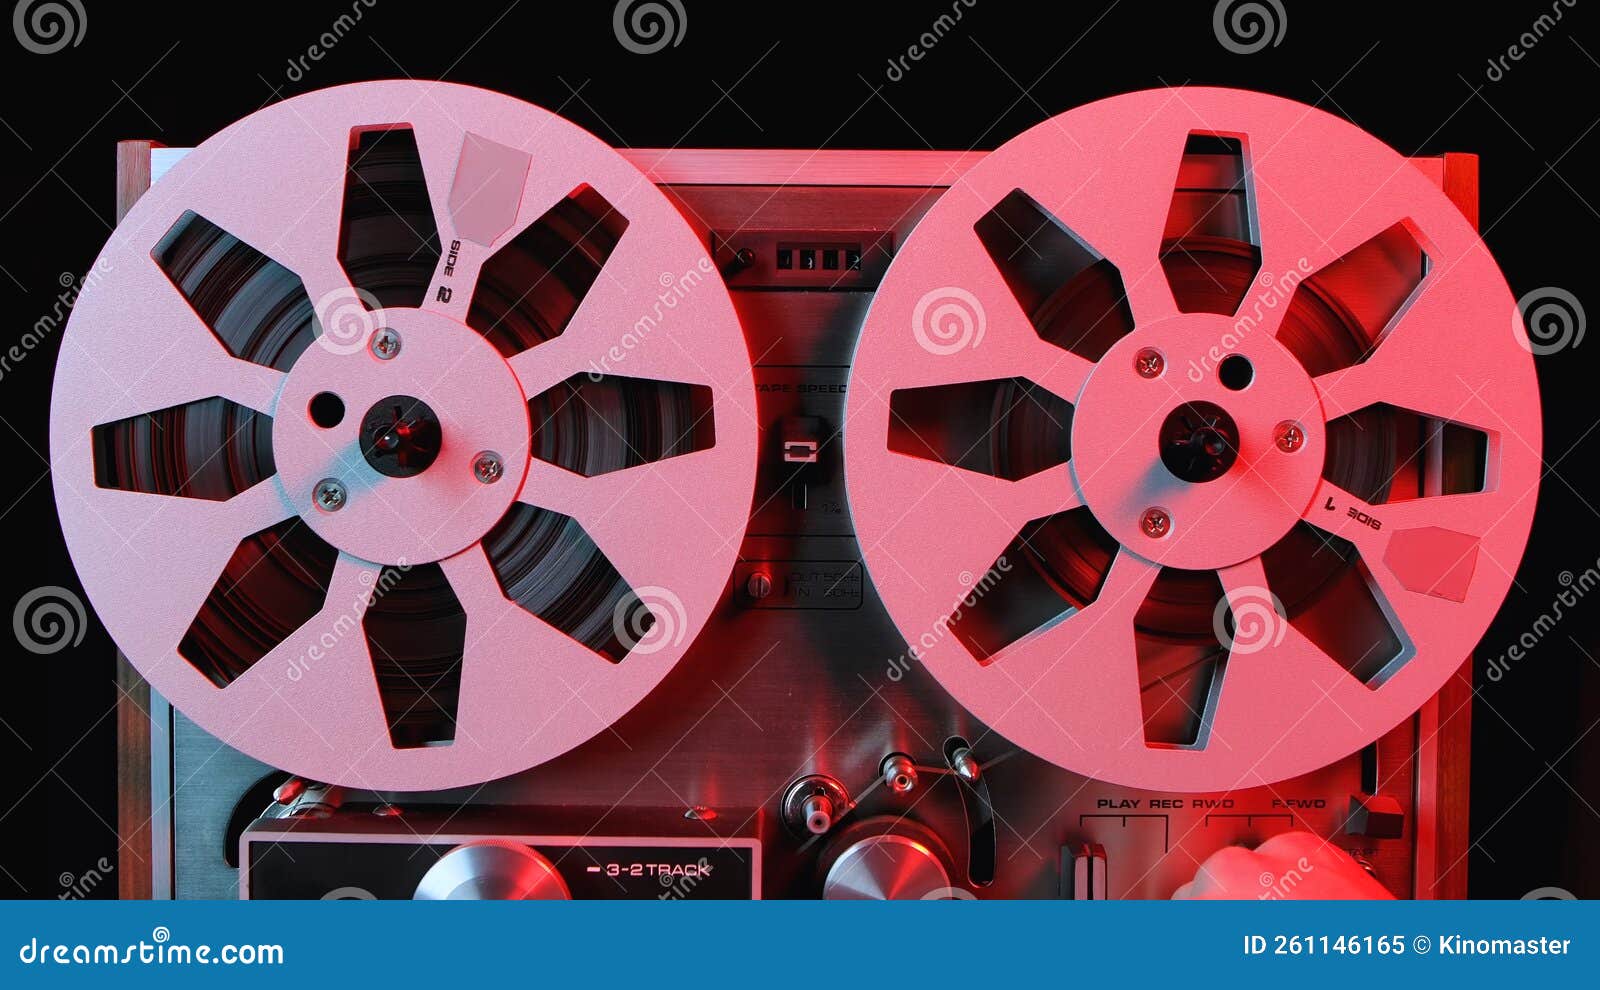 What's up with reel-to-reel cassettes?